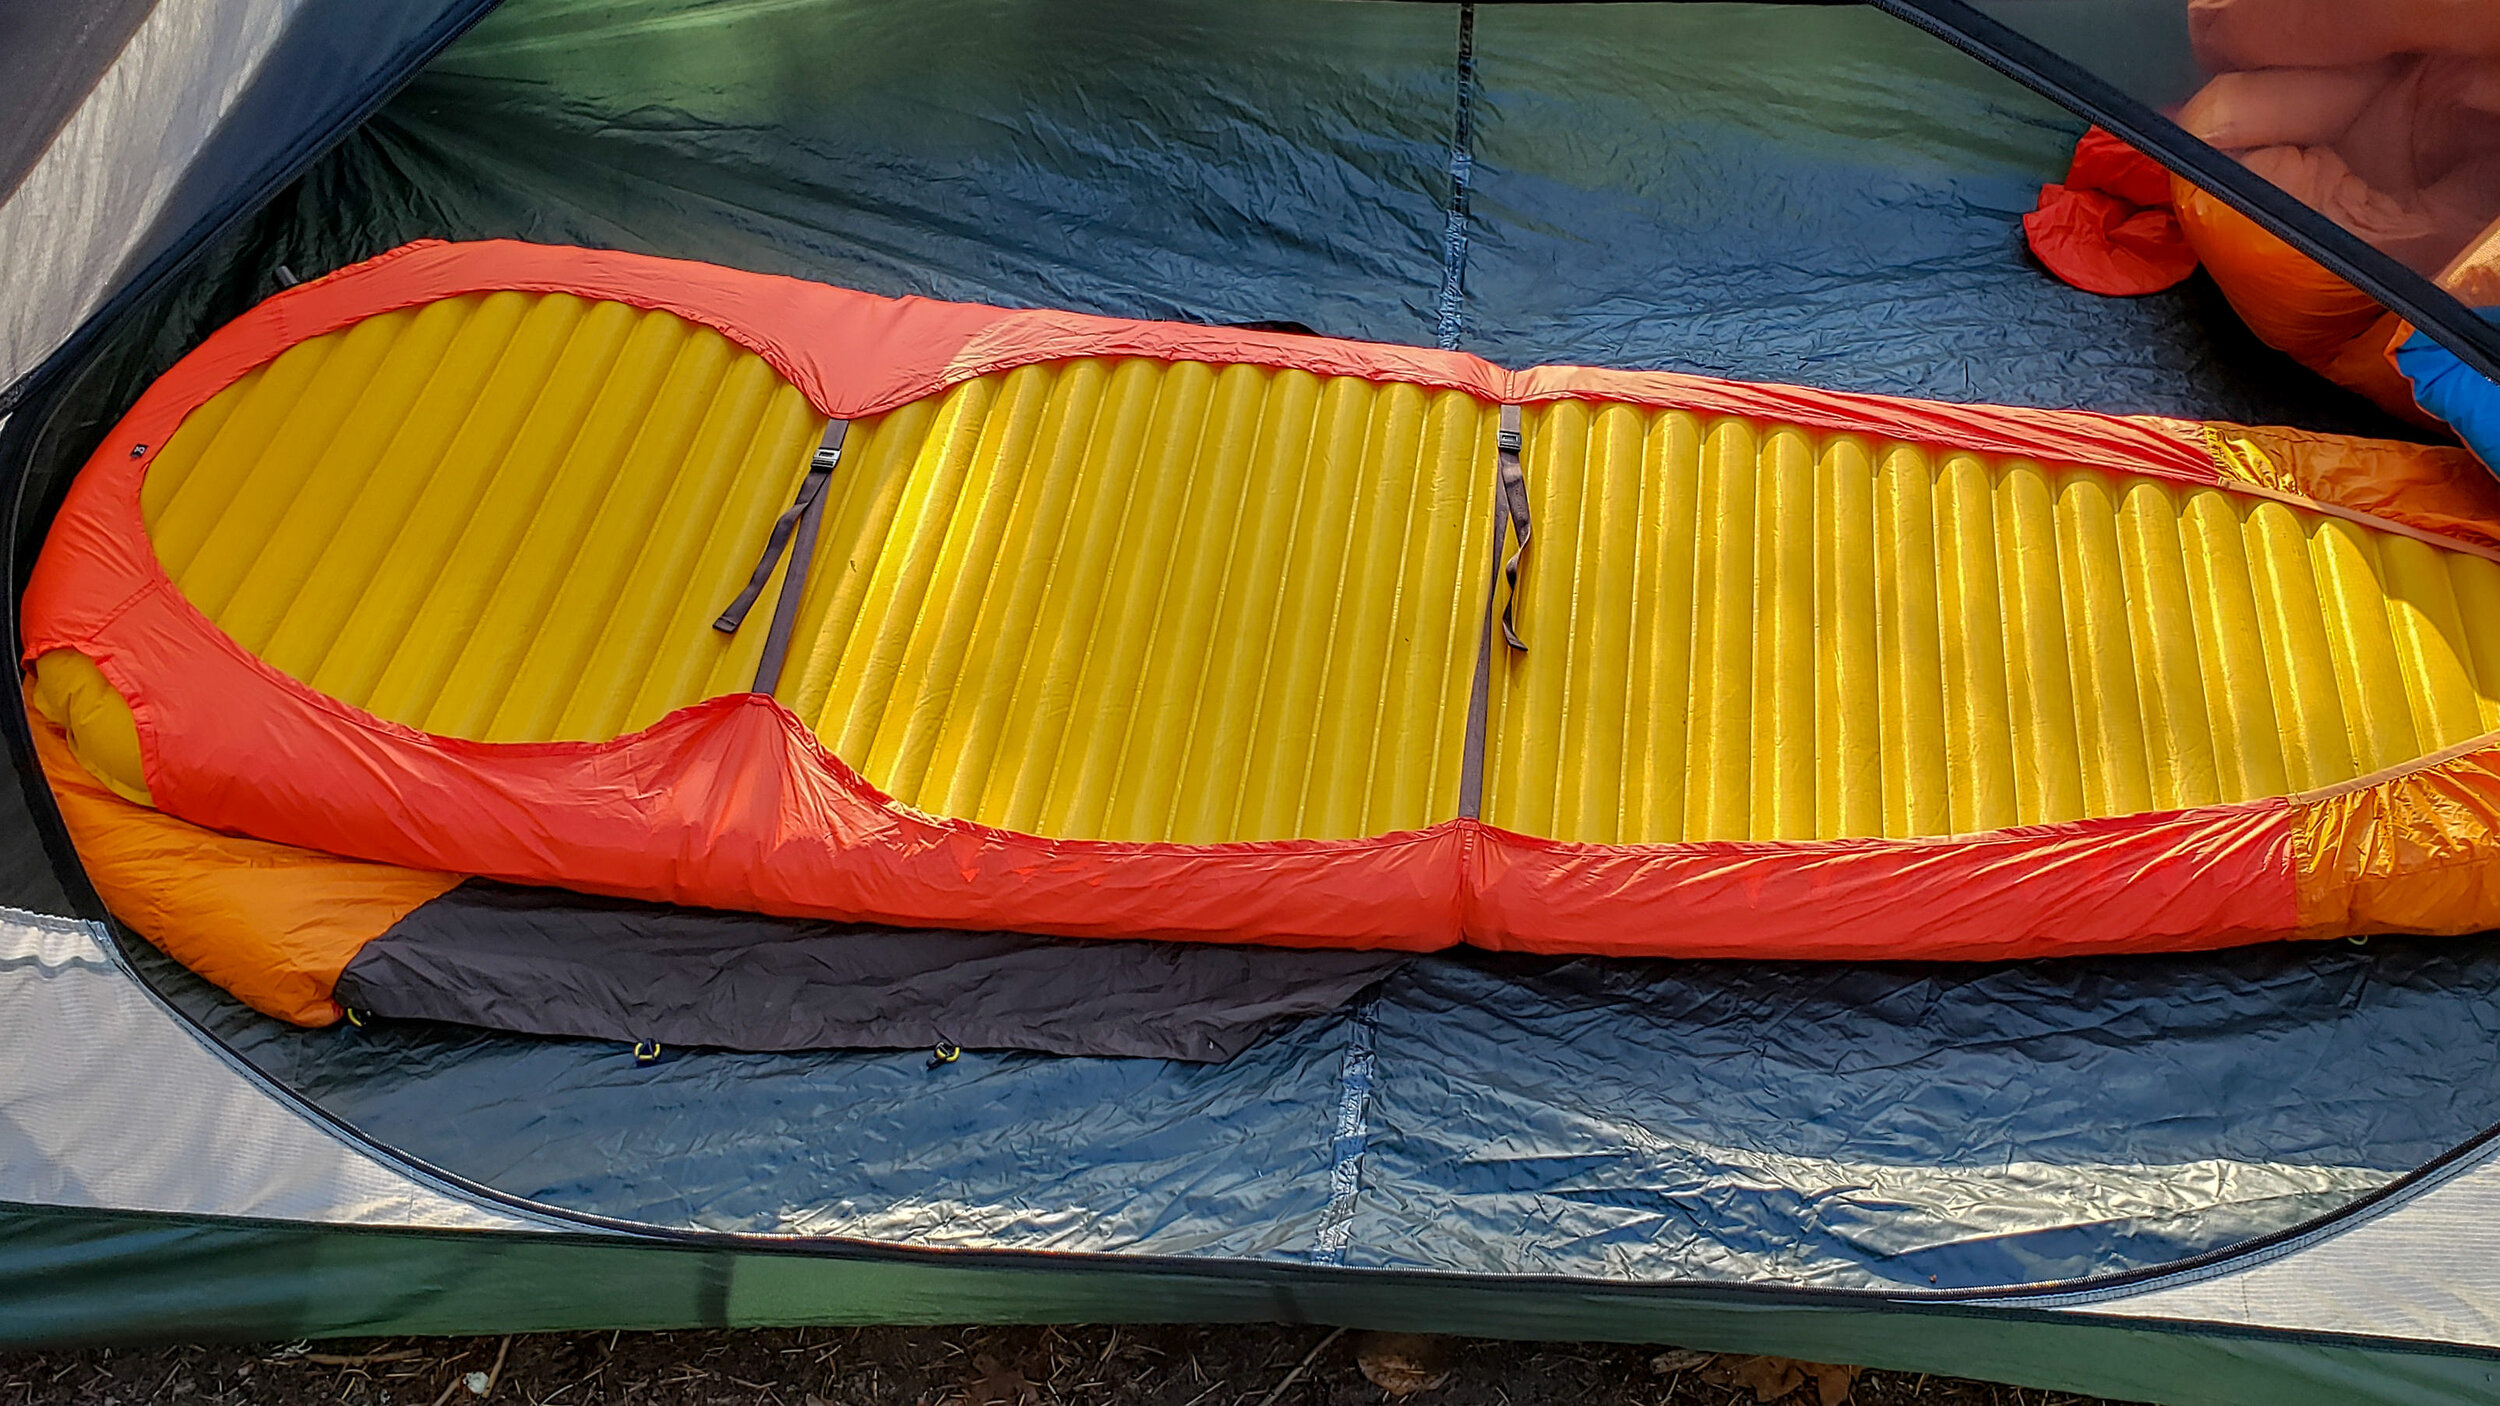 Underside view of how the zenbivy sheet attaches to a sleeping pad